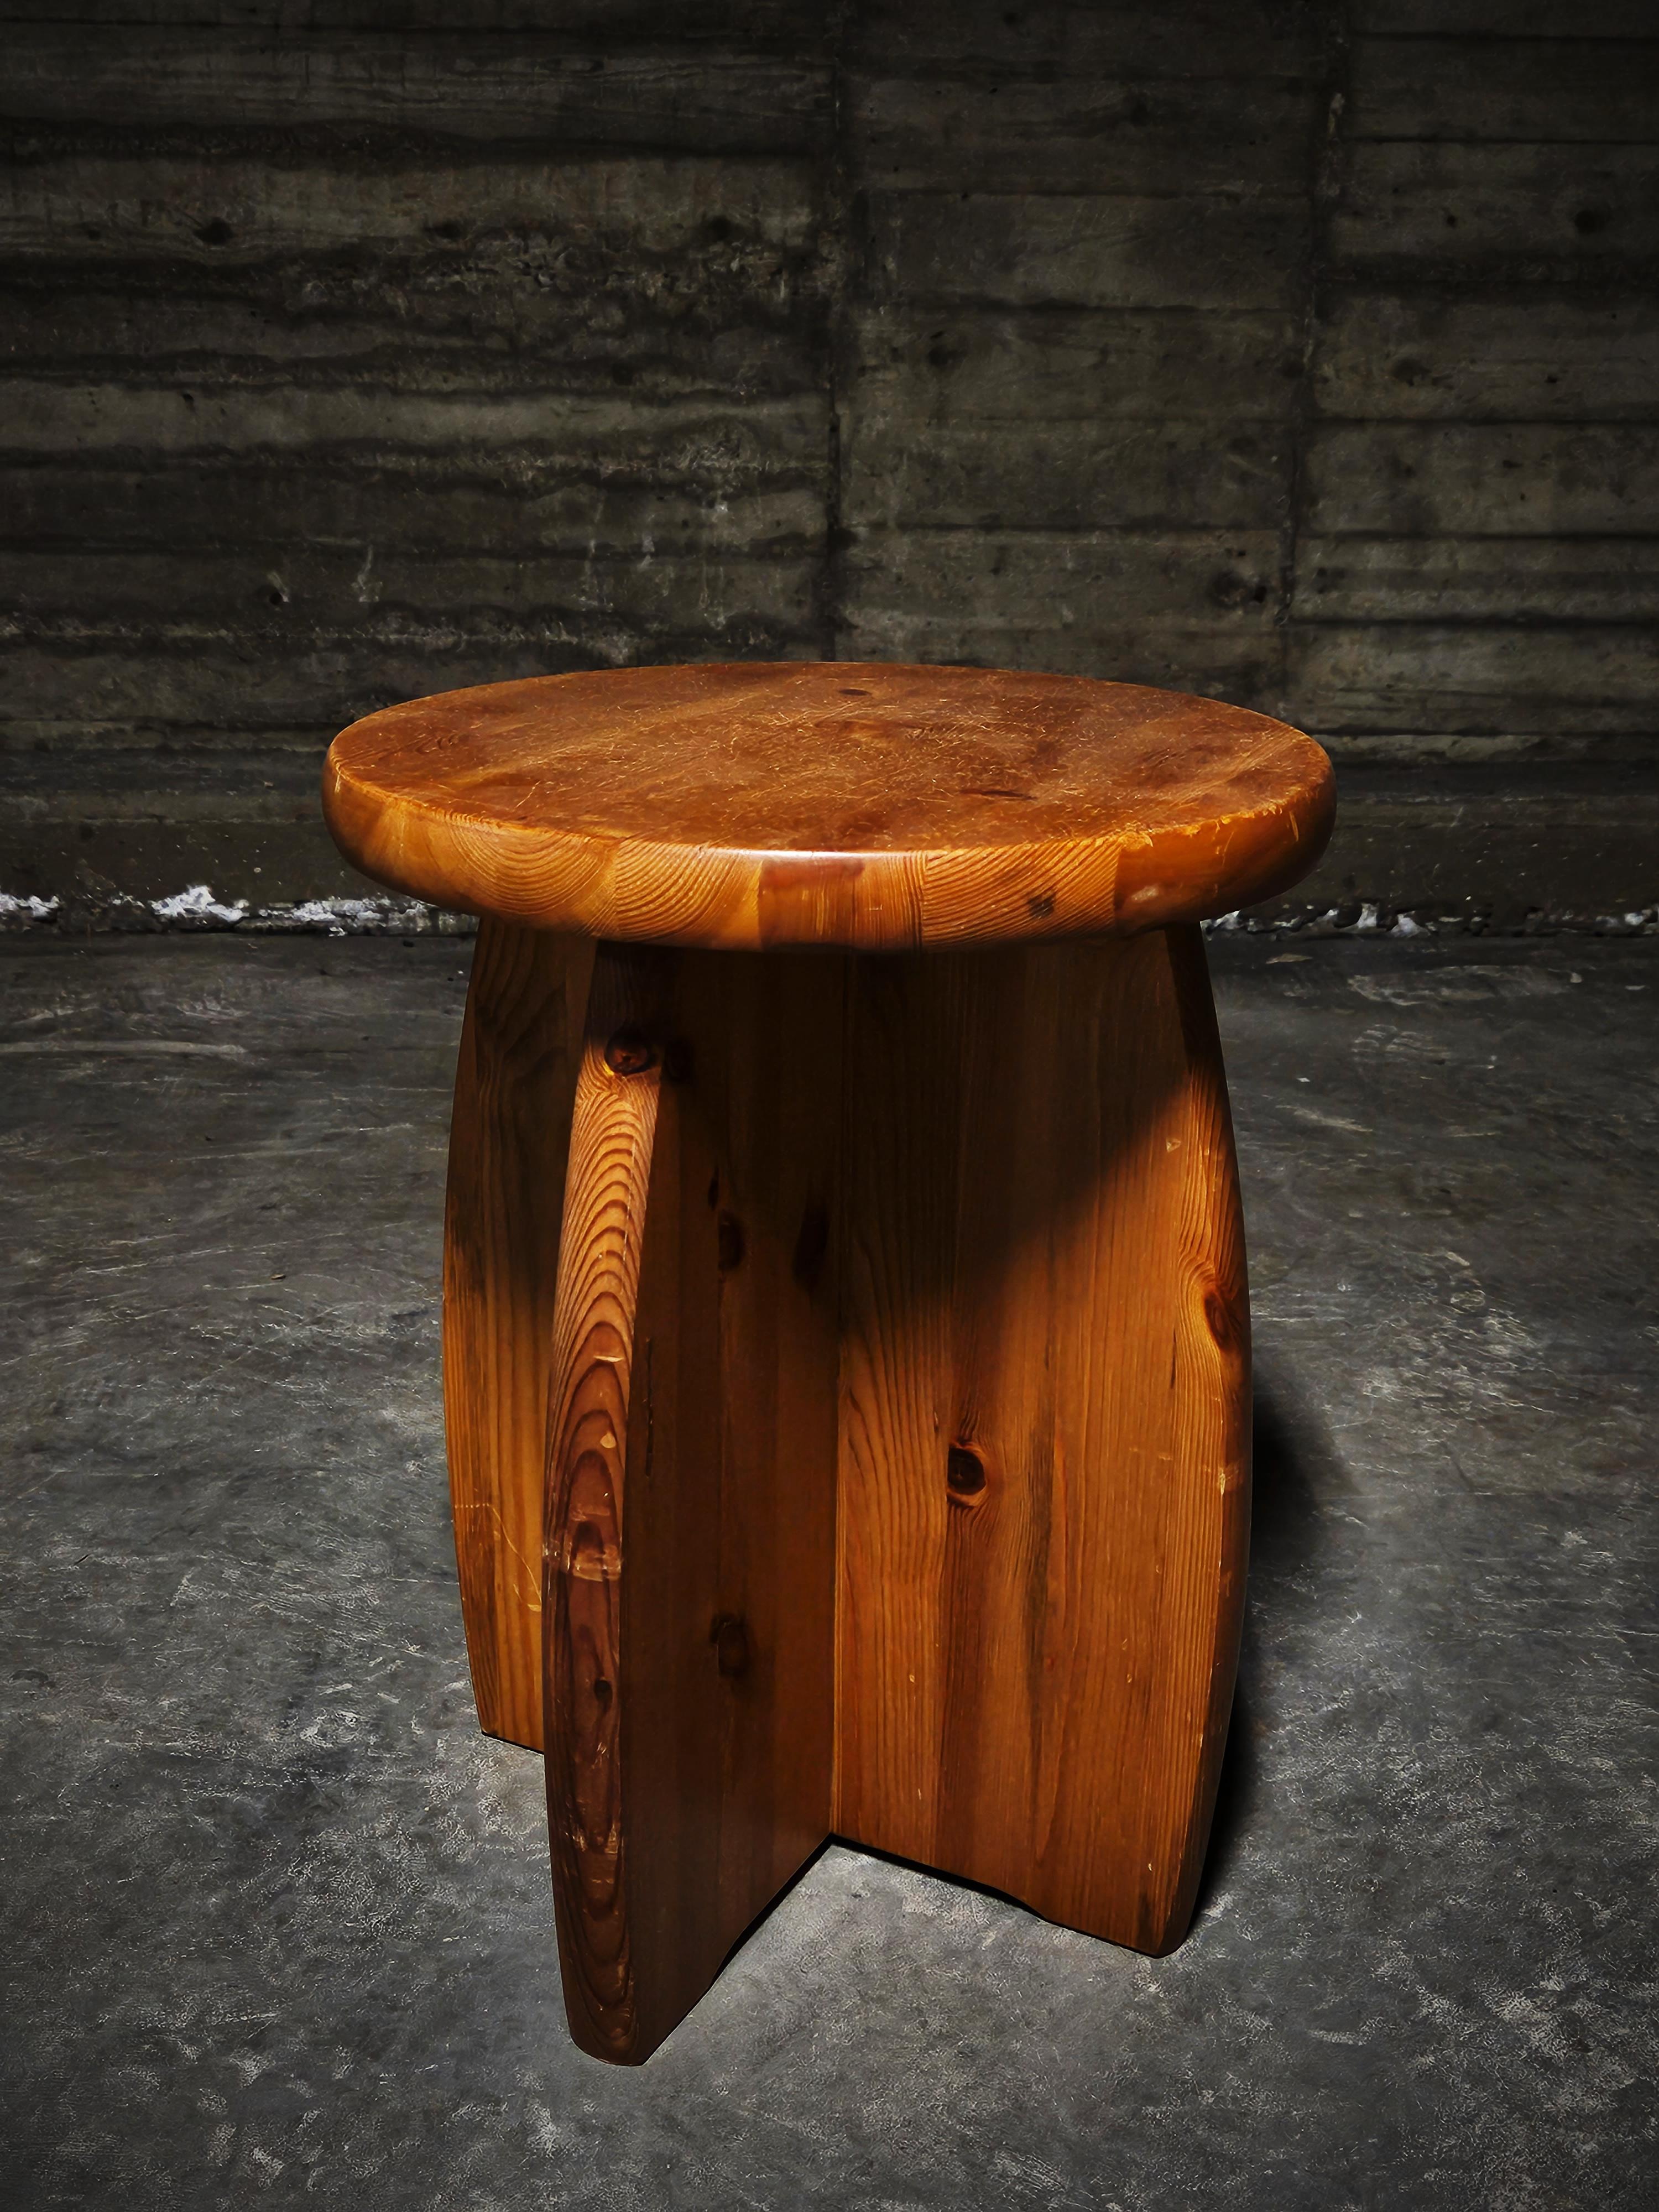 Brutalistic pine stool designed and produced in Sweden in the 1970s. 

Fits together with other so called sports cabin furniture. A style made famous by Swedish designer Axel Einar Hjorth in the 1930s. 

